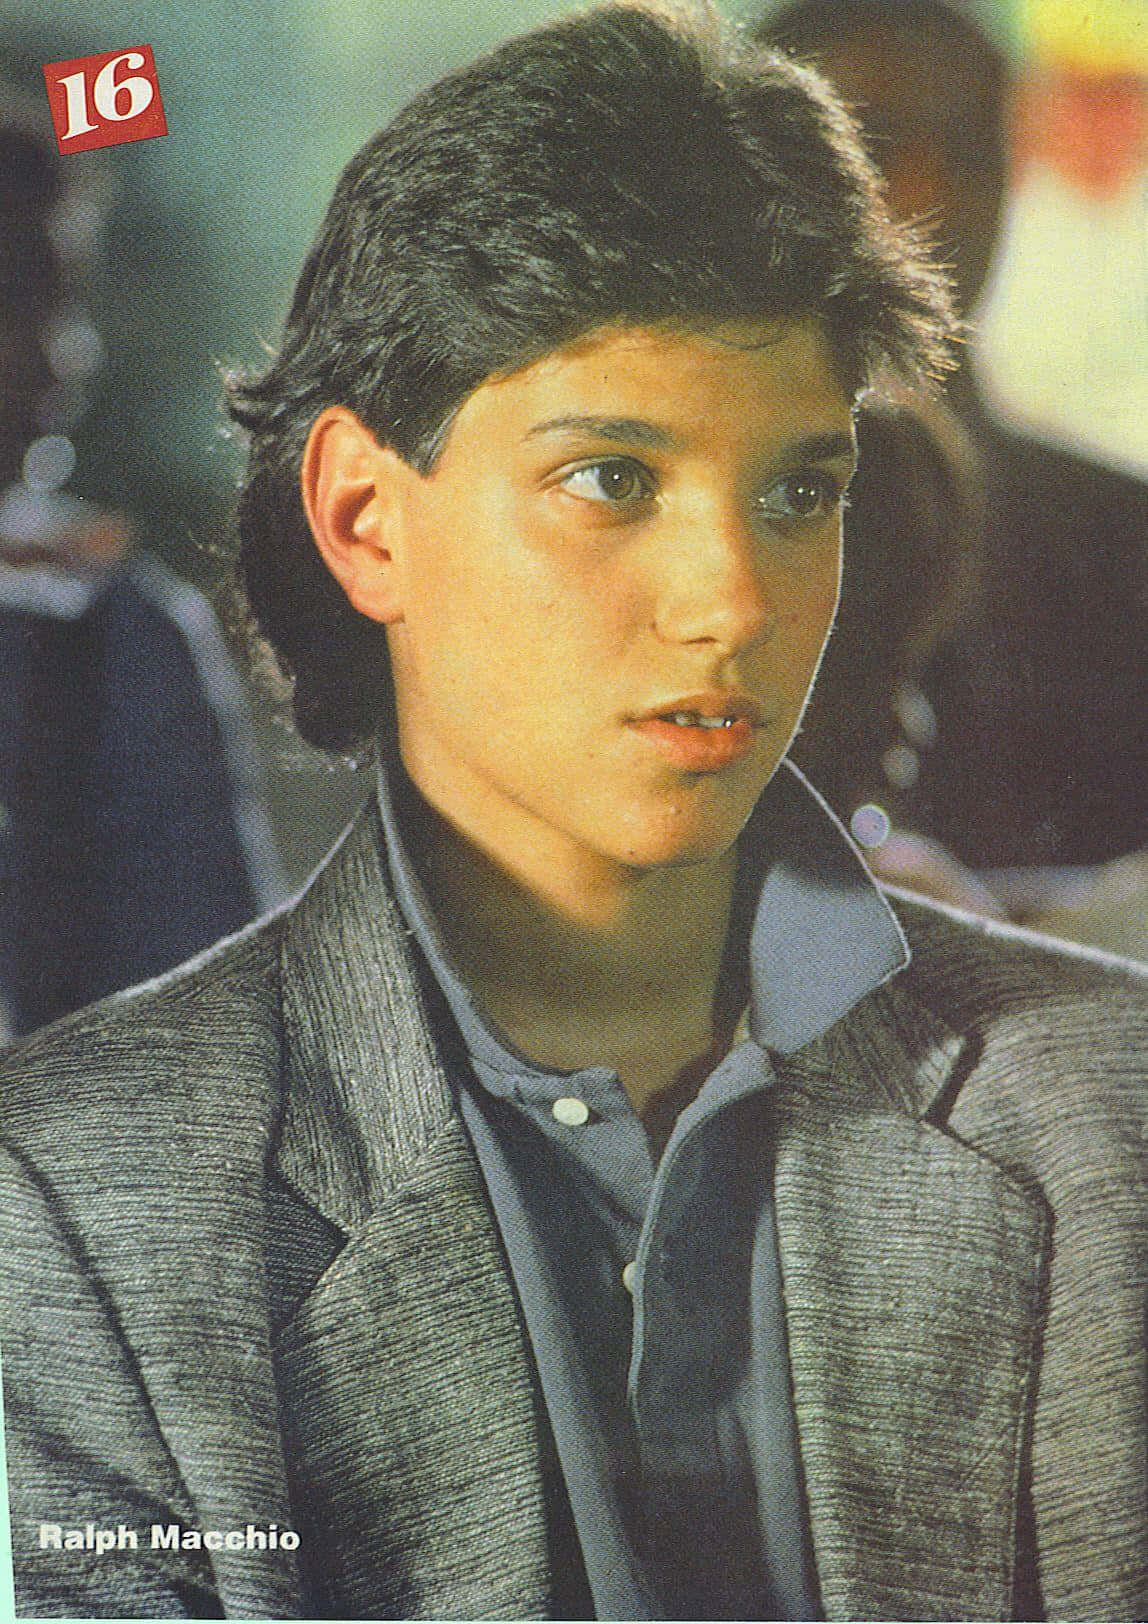 Actor Ralph Macchio is best known for his iconic role in 'The Karate Kid', smiling for the camera. Wallpaper